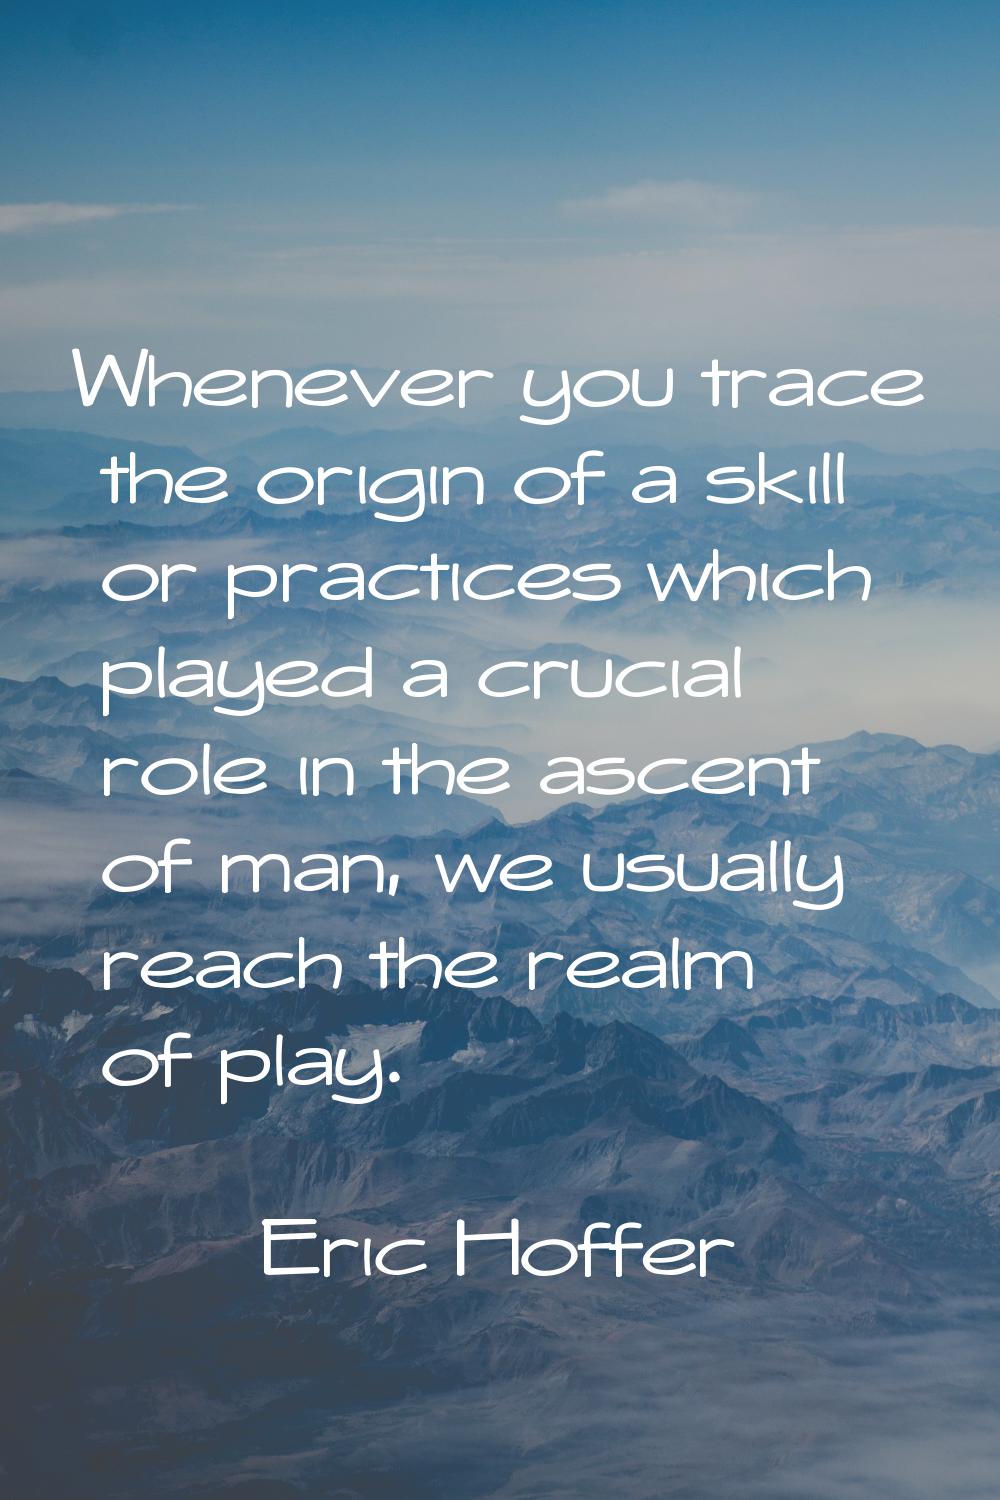 Whenever you trace the origin of a skill or practices which played a crucial role in the ascent of 